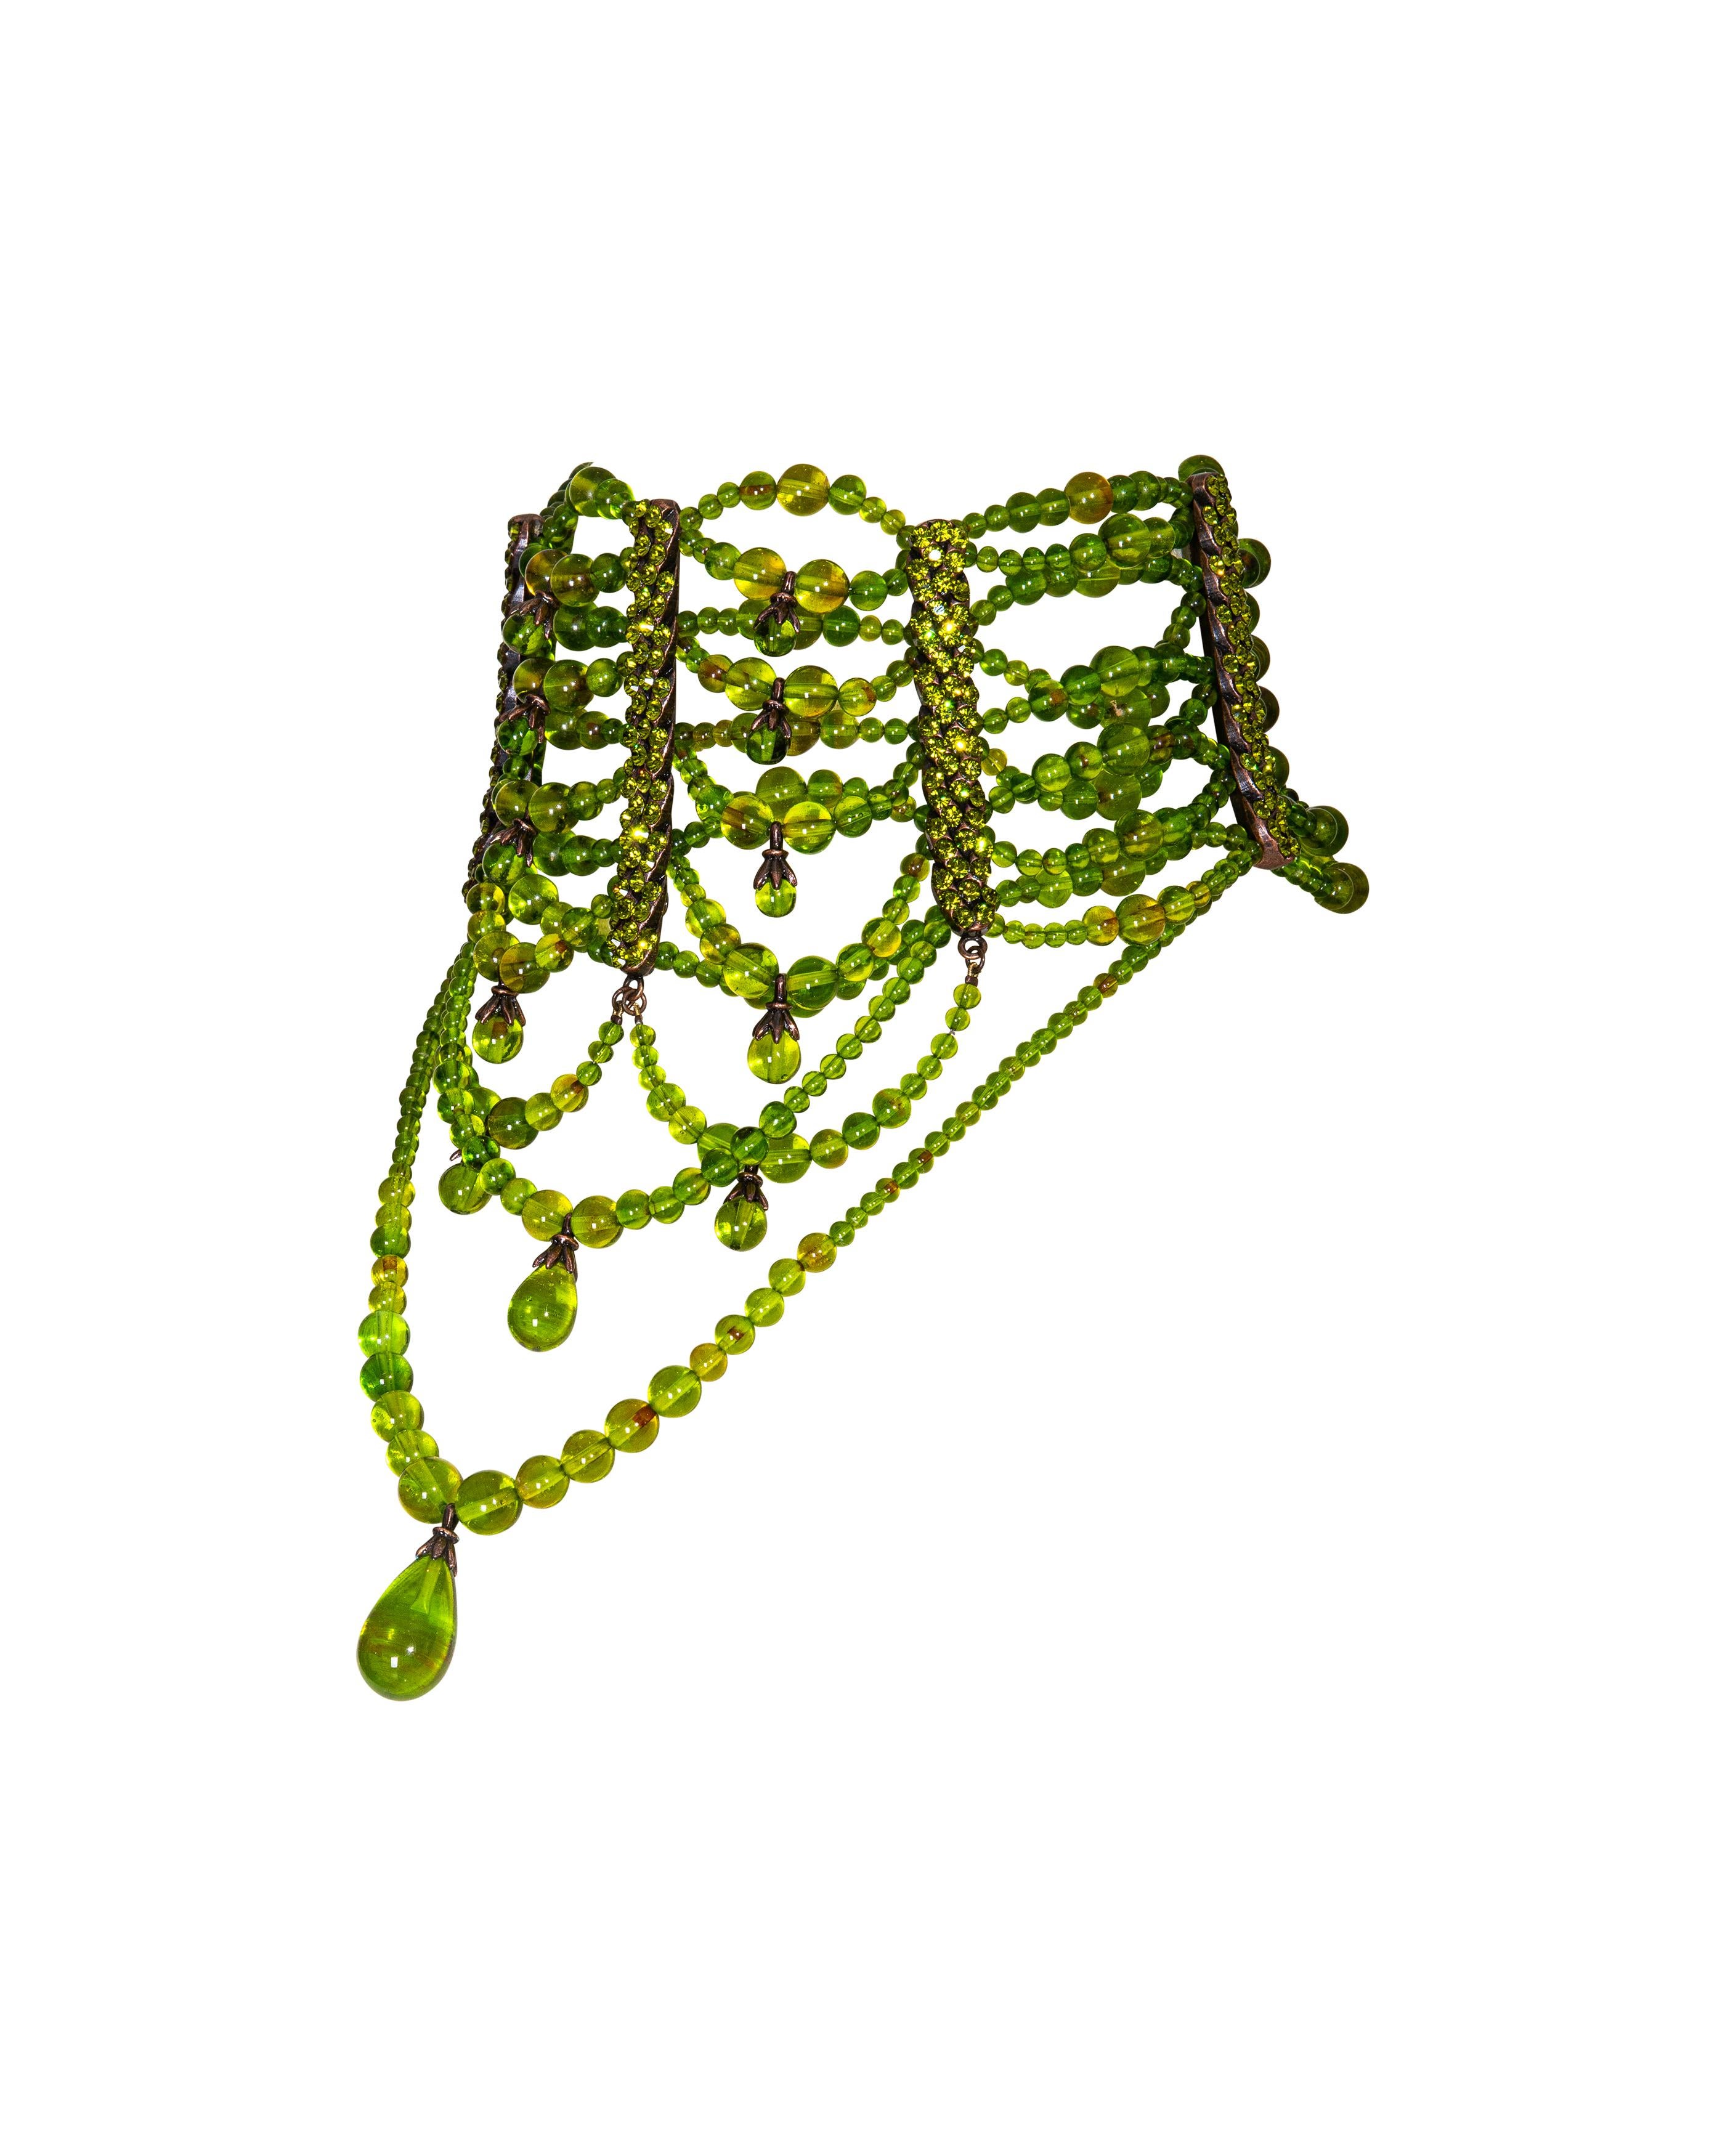 c. A/W 2003 Christian Dior by John Galliano Haute Couture green beaded choker necklace. Deep olive green beaded strands with two green gemstone pendant details. Metallic green rhinestone encrusted front hardware. Dark copper-tone back hardware with